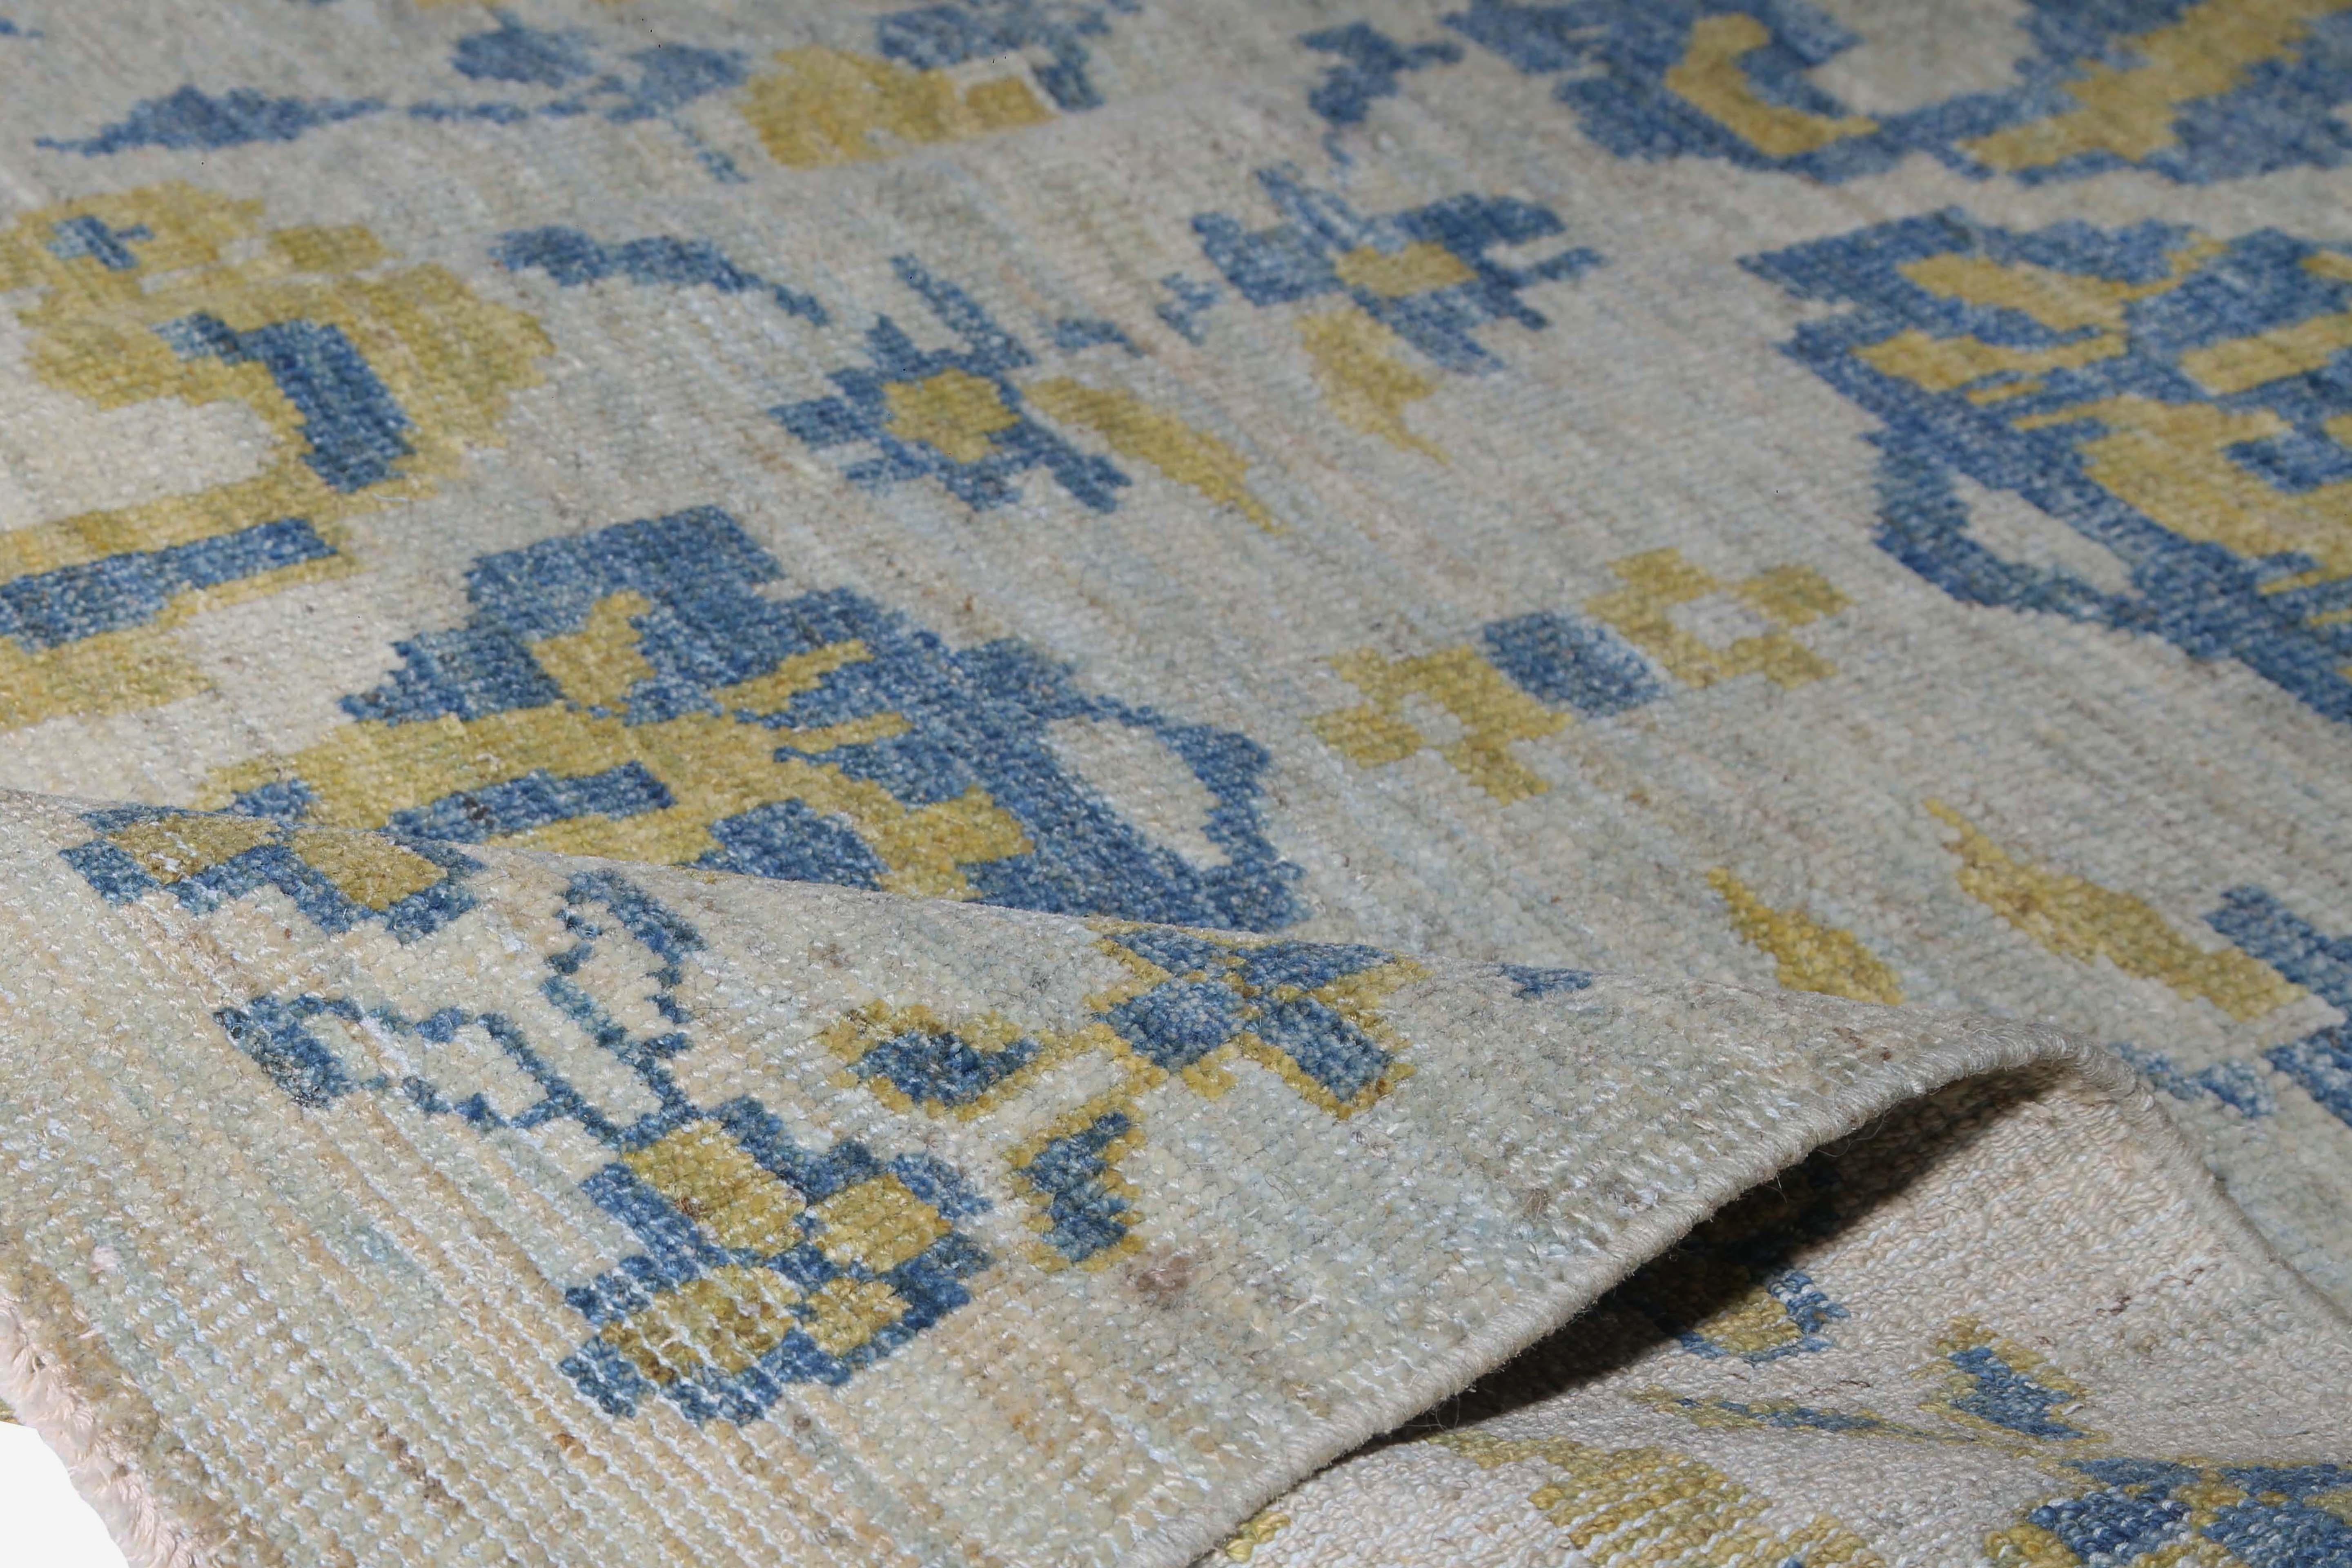 Introducing our stunning handmade Sultanabad rug from Turkey, now available in an 8'0'' x 10'4'' size. This contemporary twist on a traditional style features a light beige off-white background with vivid yellow and blue colors creating a